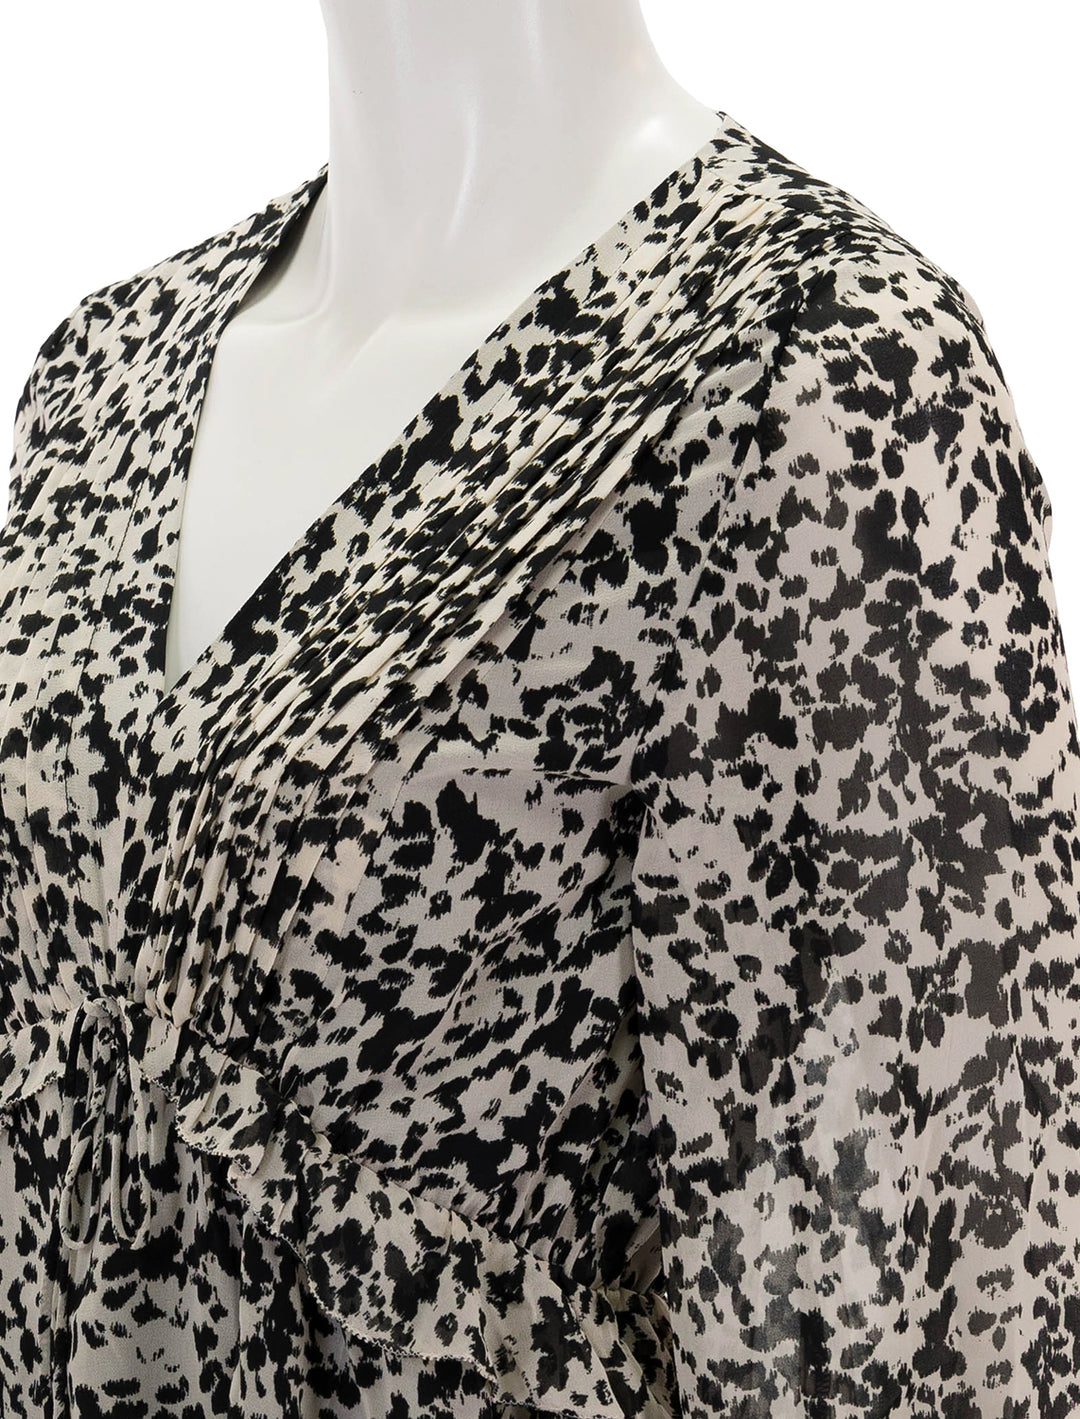 Close-up view of Steve Madden's rami dress in black and ivory floral.